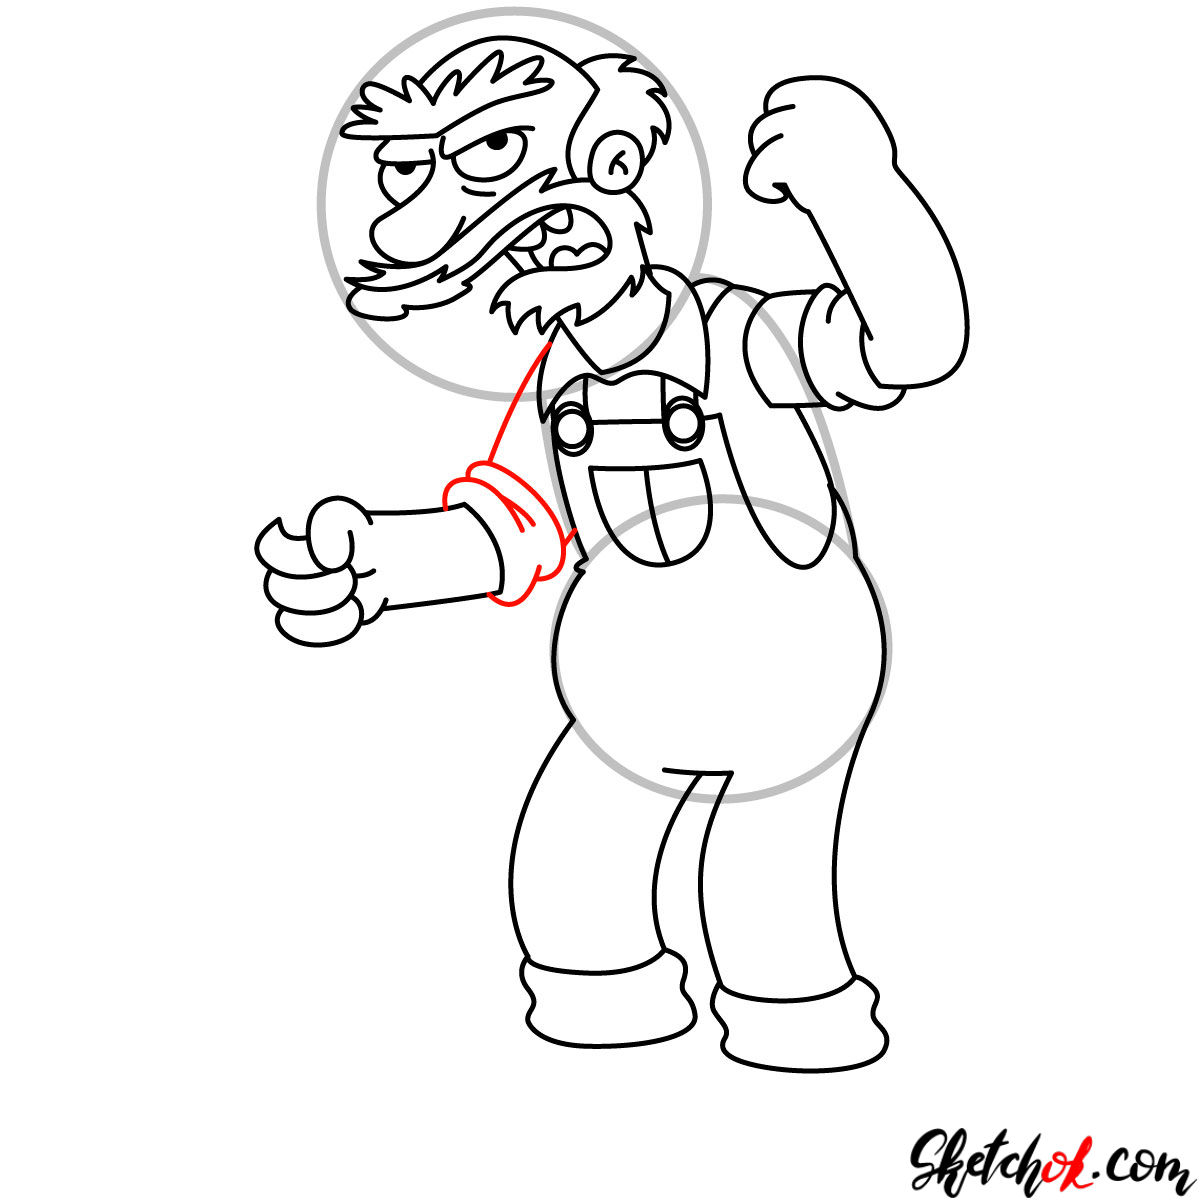 How to draw Groundskeeper Willie with a shovel - step 12